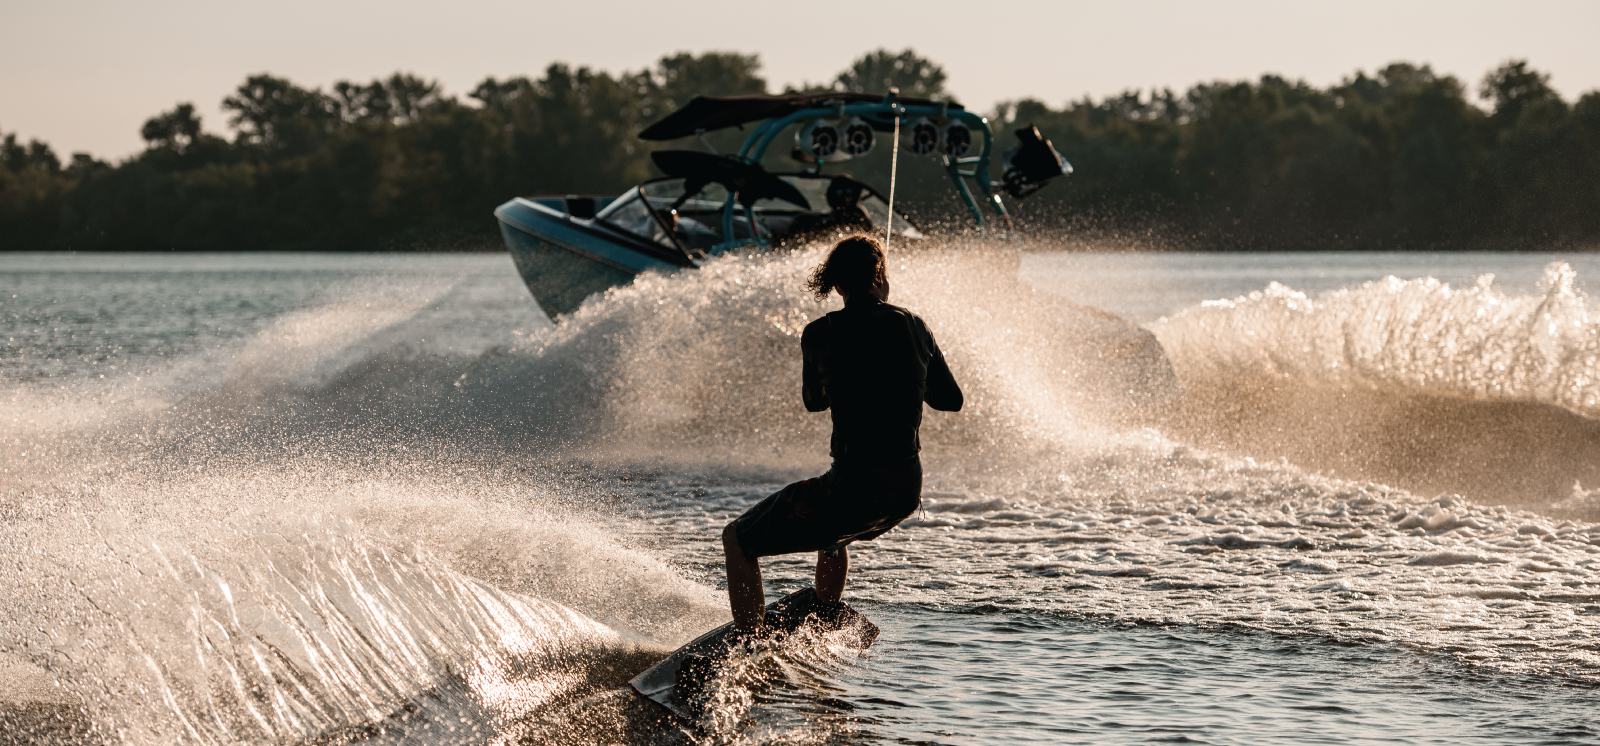 Person wakeboarding